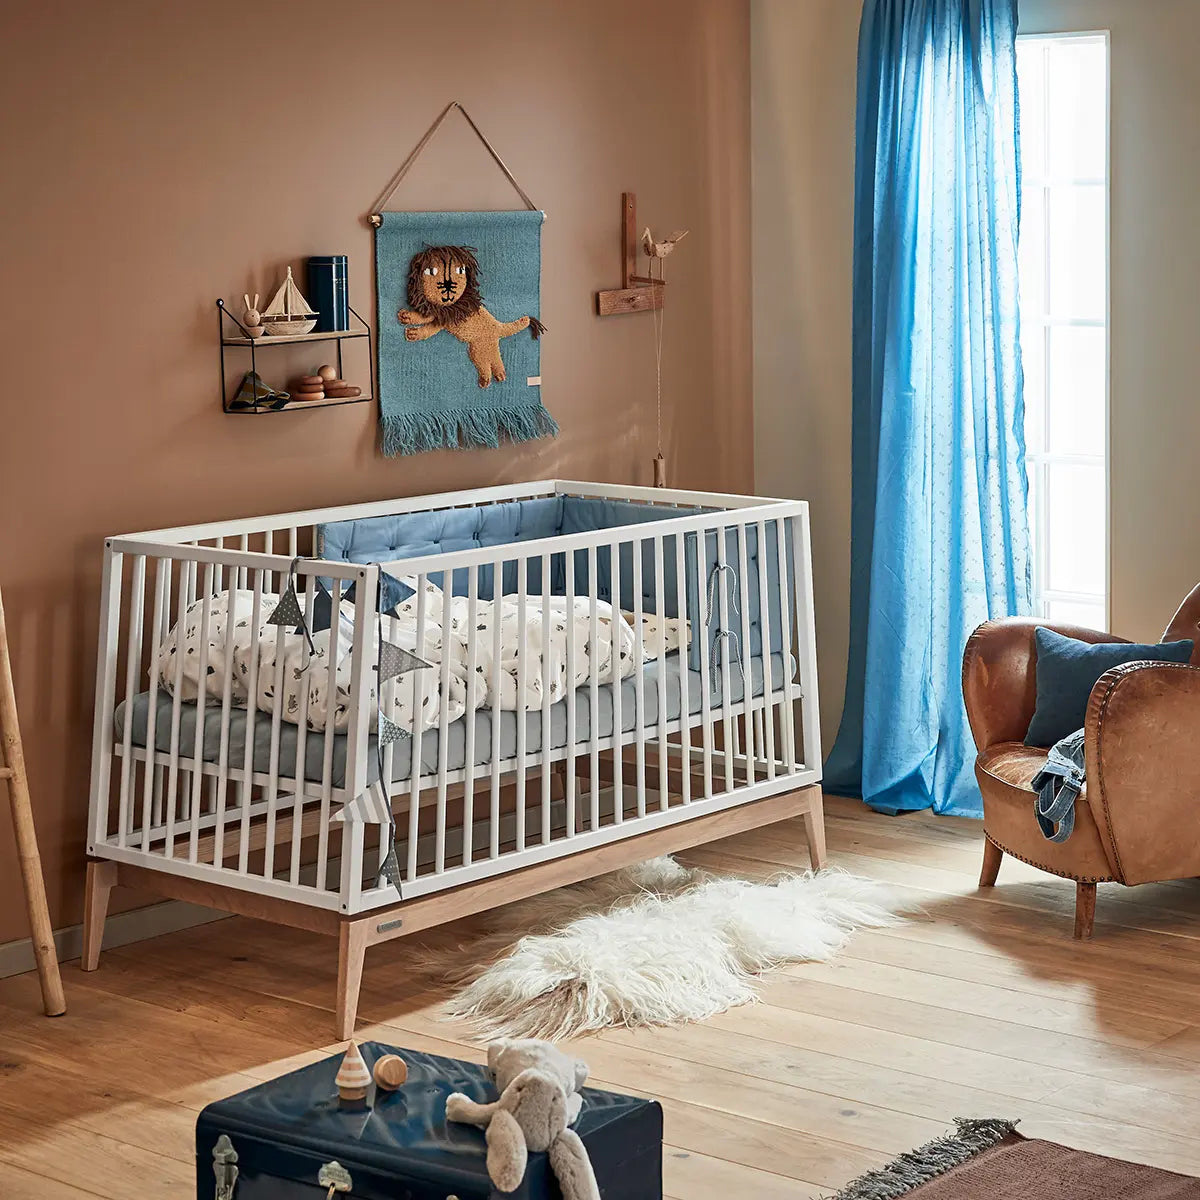 Leander Luna Cot 120 x 60 and Mattress Package